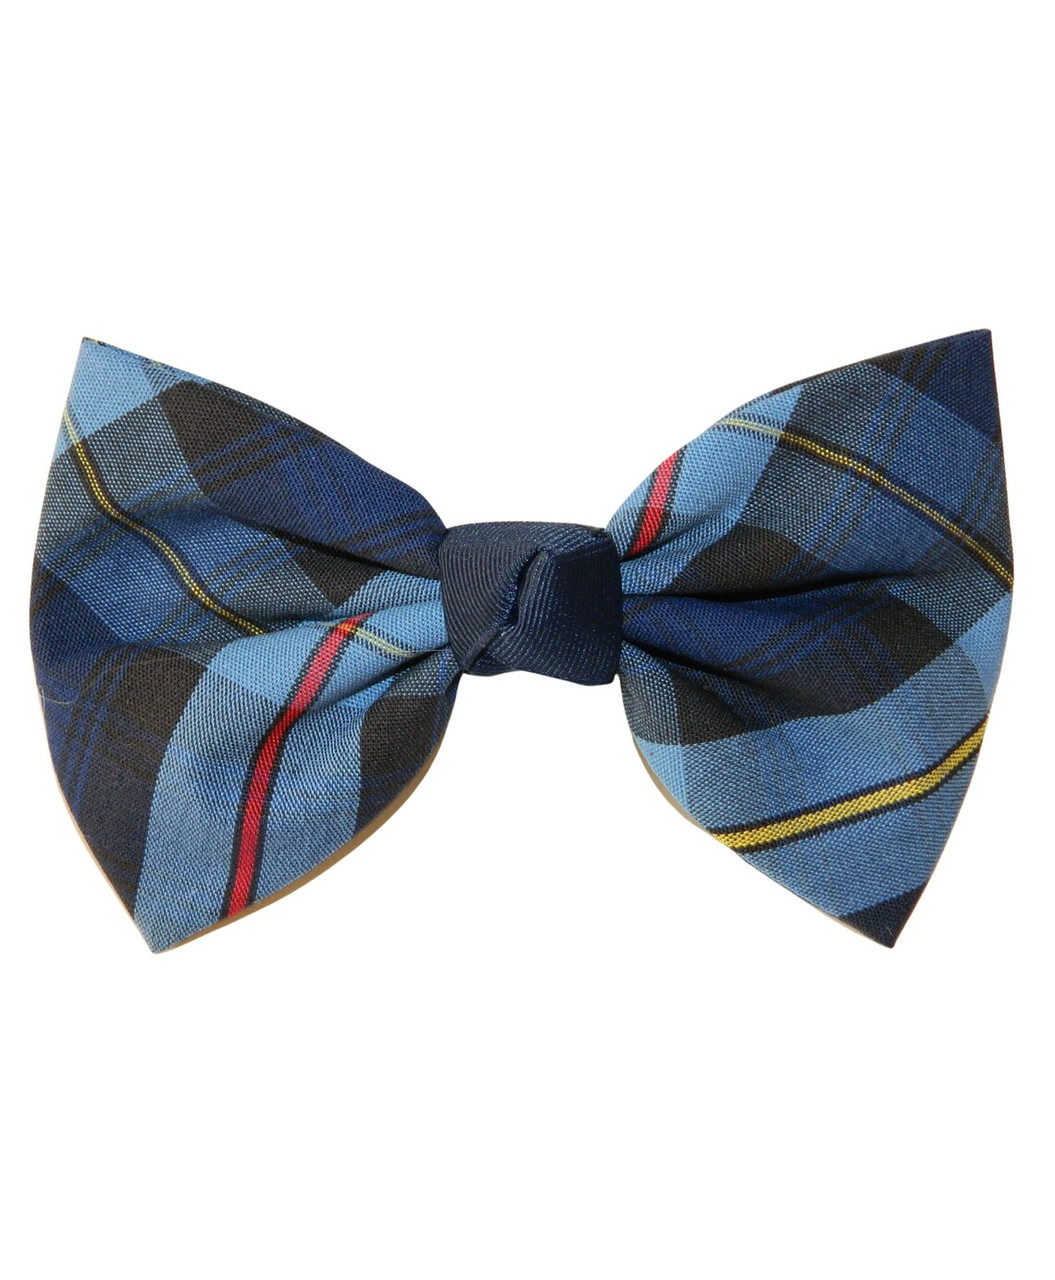 Navy, Red & Yellow Plaid Kennedy Hair Bow